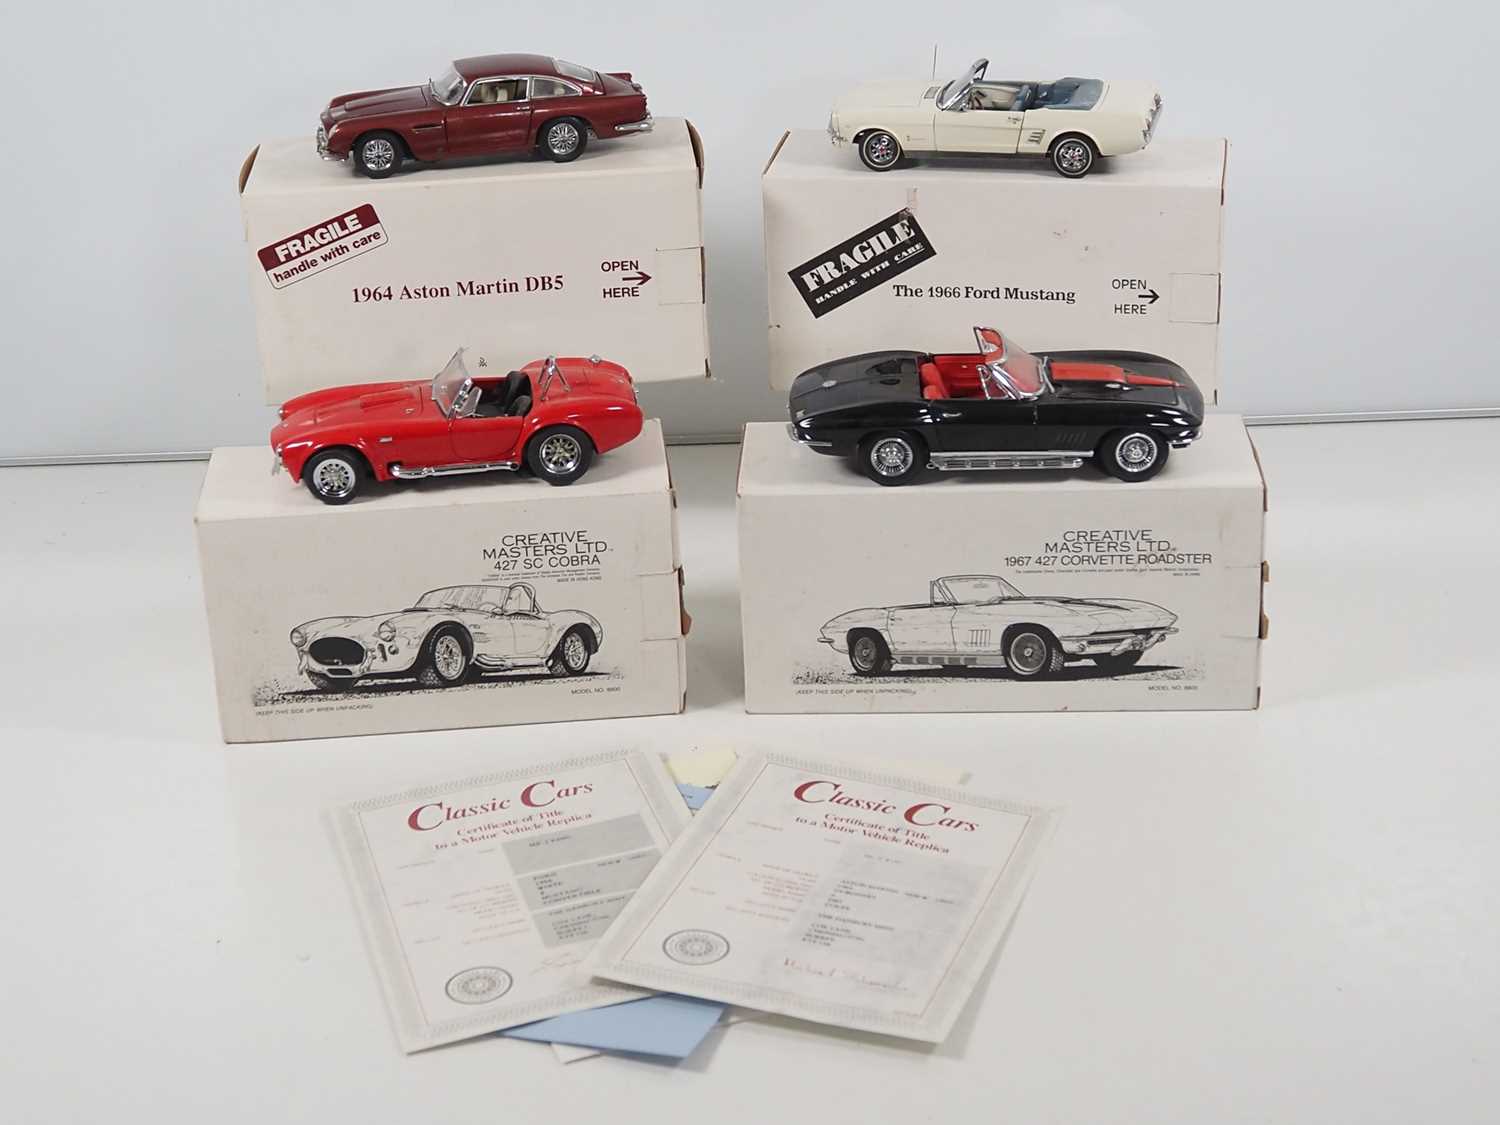 A group of mixed 1:24 scale diecast cars by DANBURY MINT and CREATIVE MASTERS to include a 1966 Ford